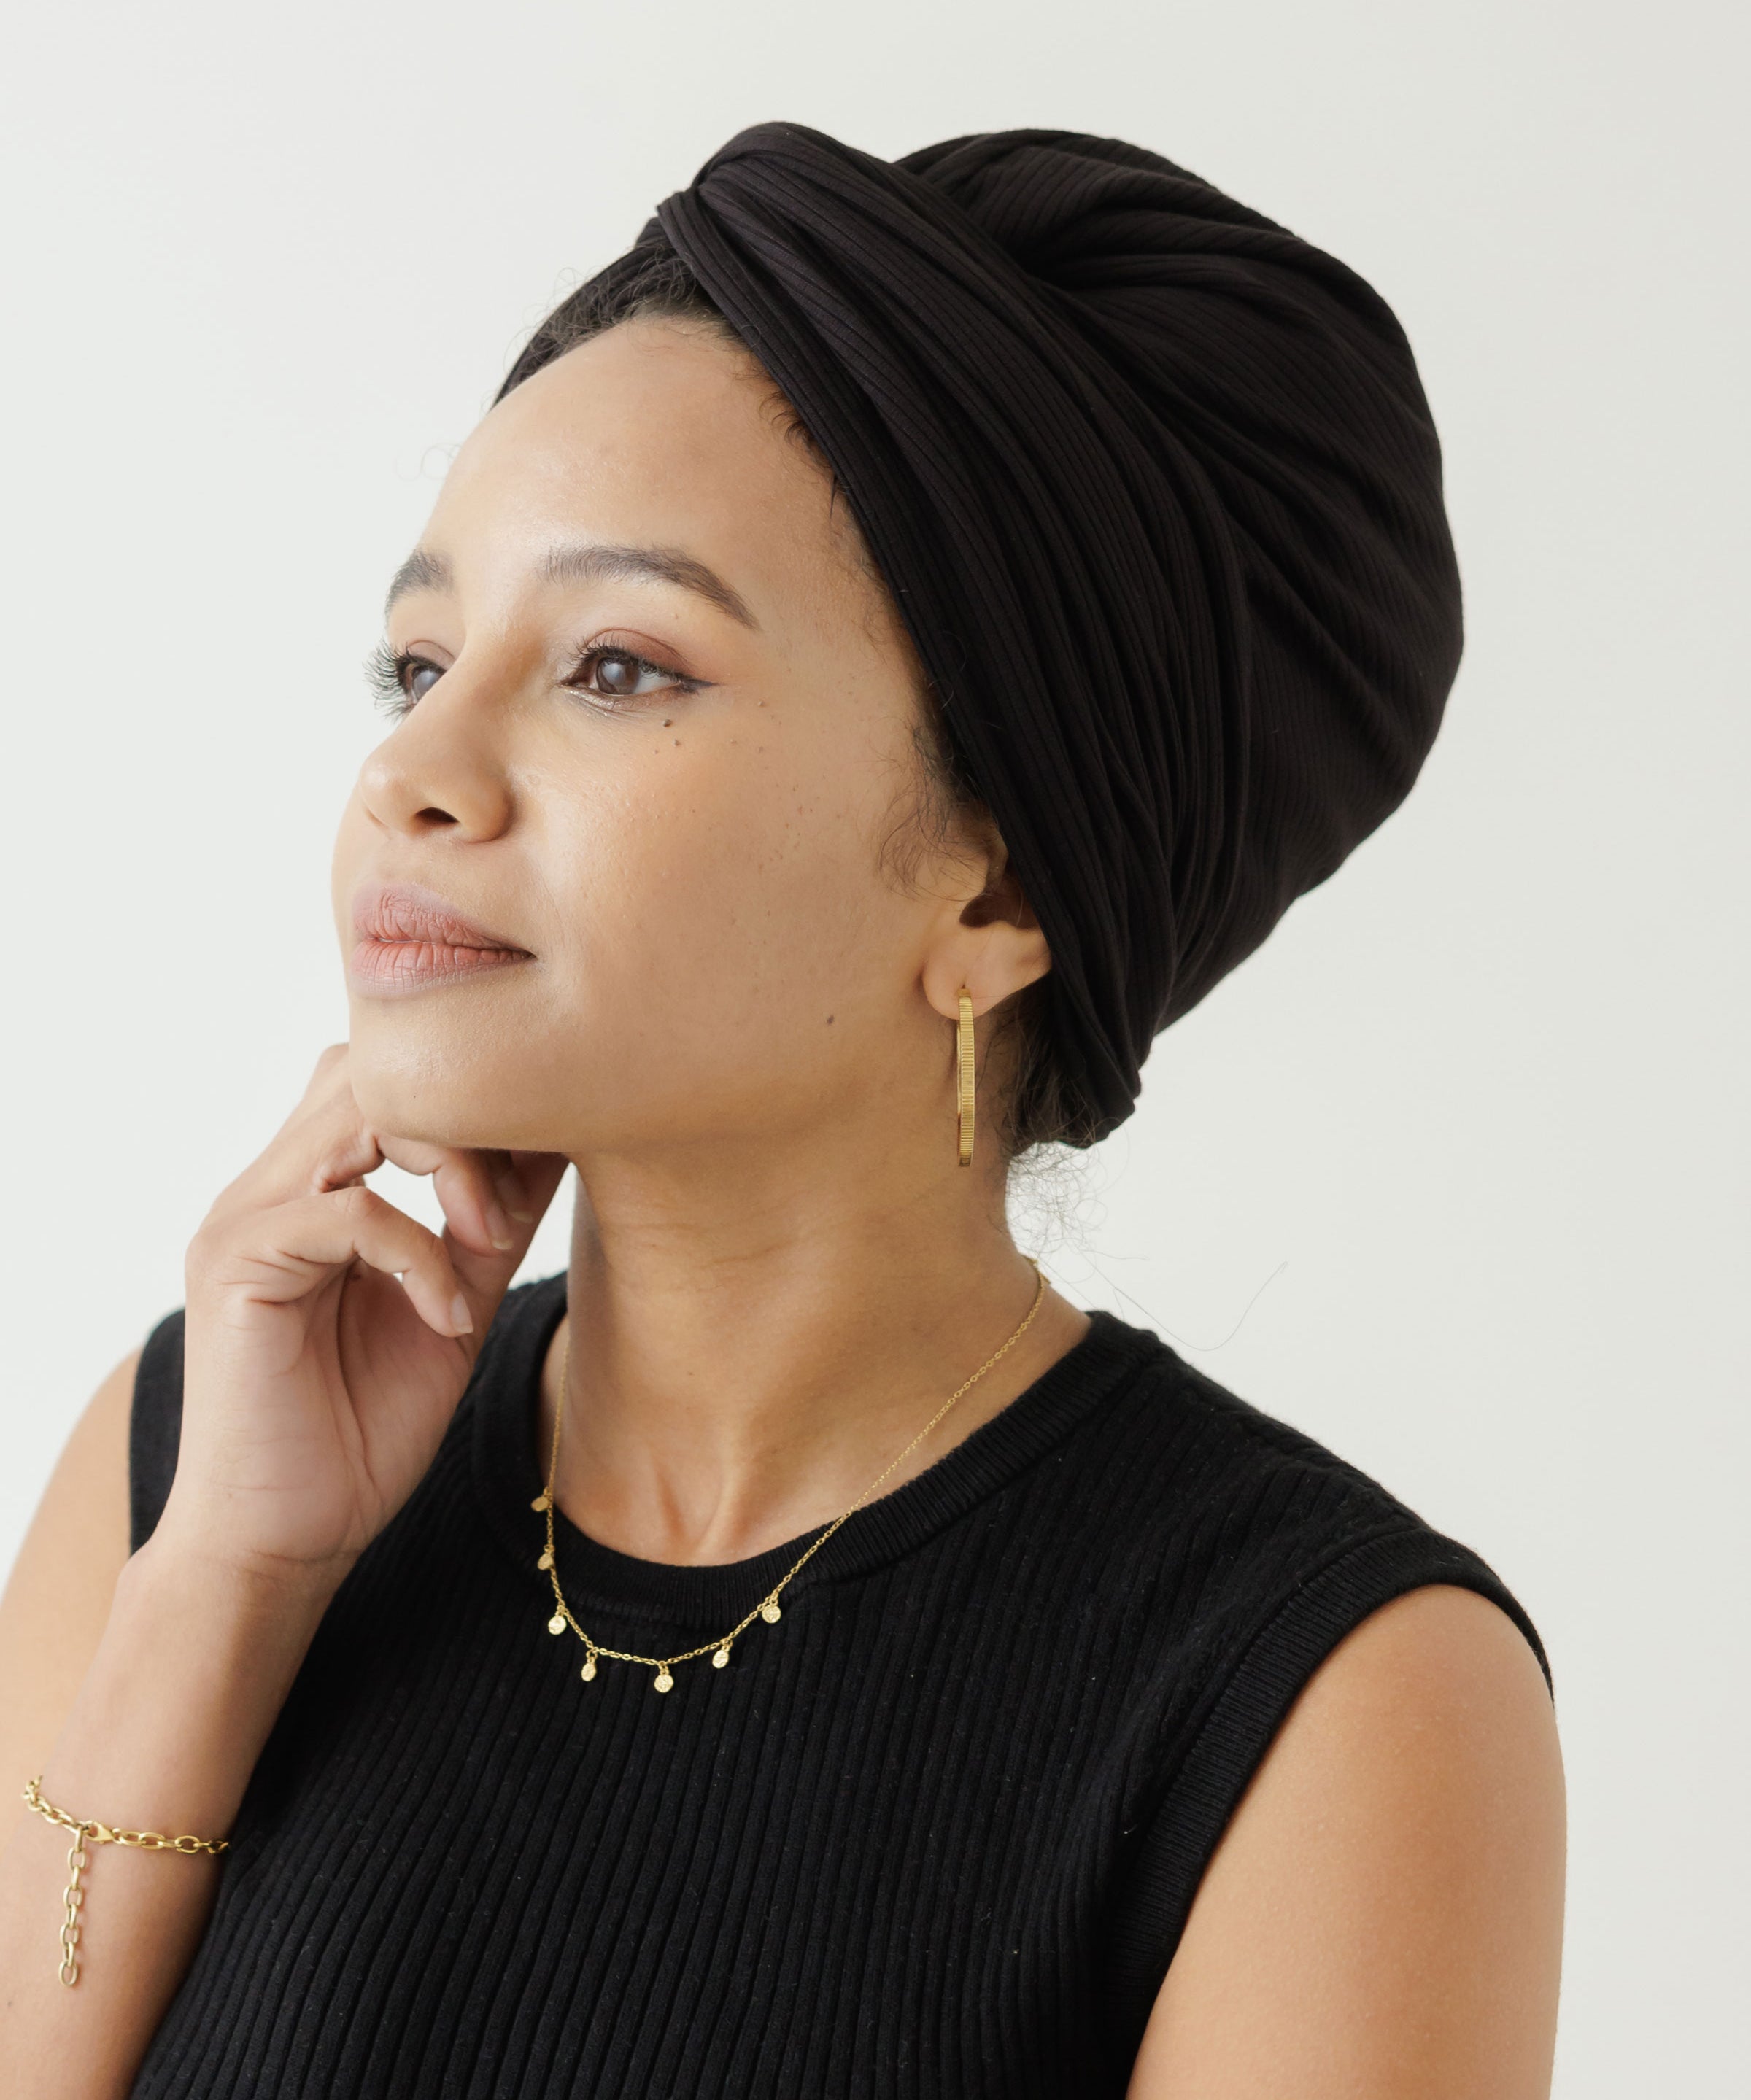 A Complicated and Beautiful Record of How Modern Headwraps Came to Be